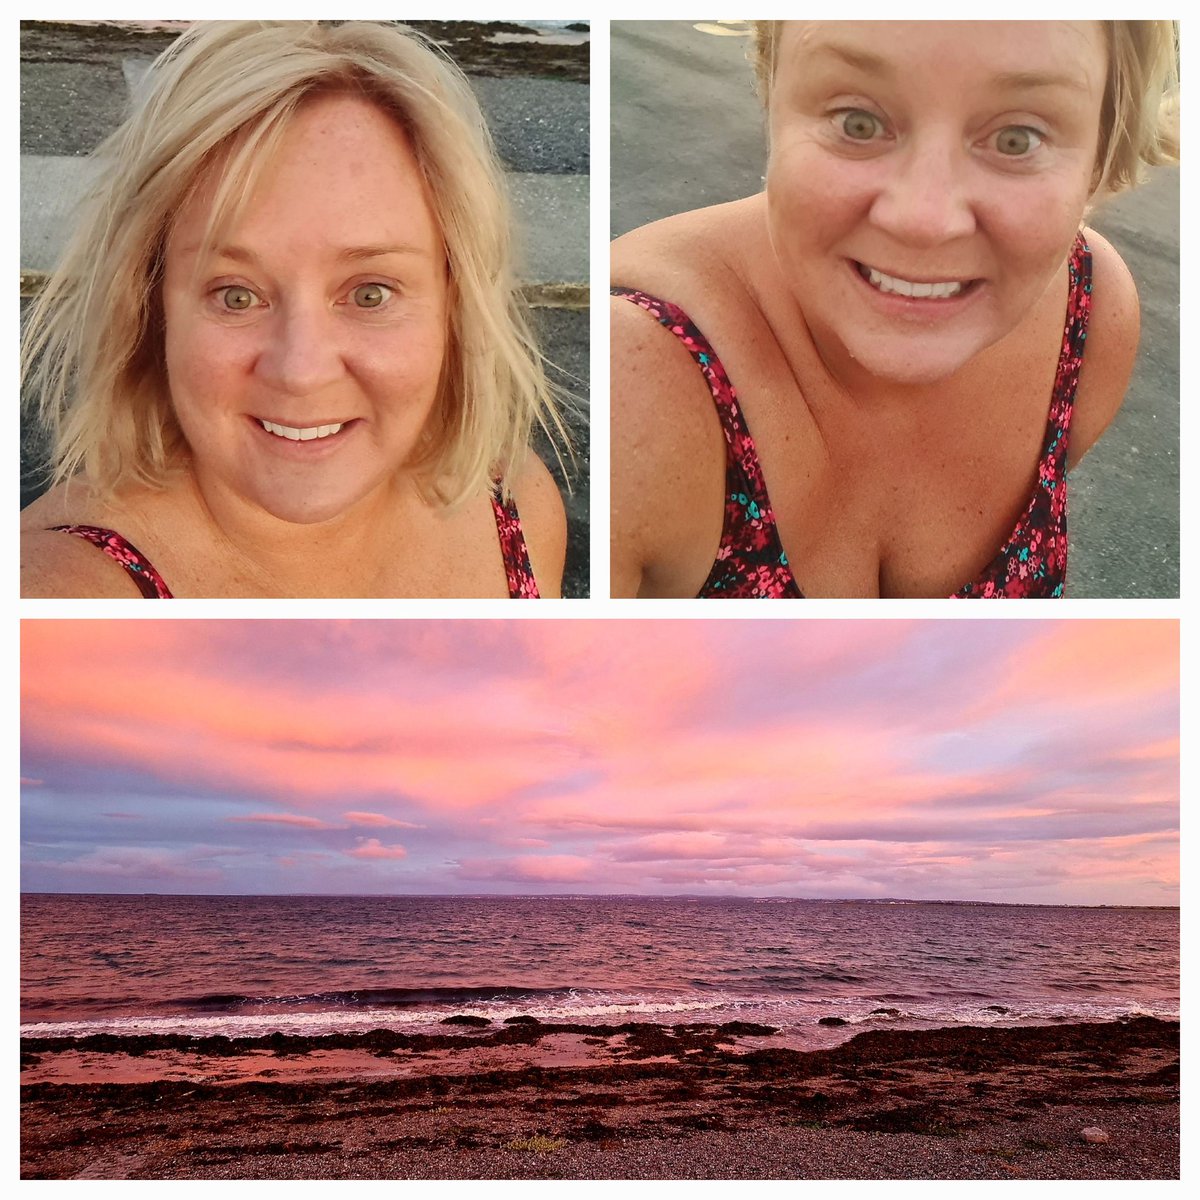 The early bird catches this amazing #sunrise and a refreshing #swim #HappyHumpDay followed by a #beach #walk #100daysofwalking